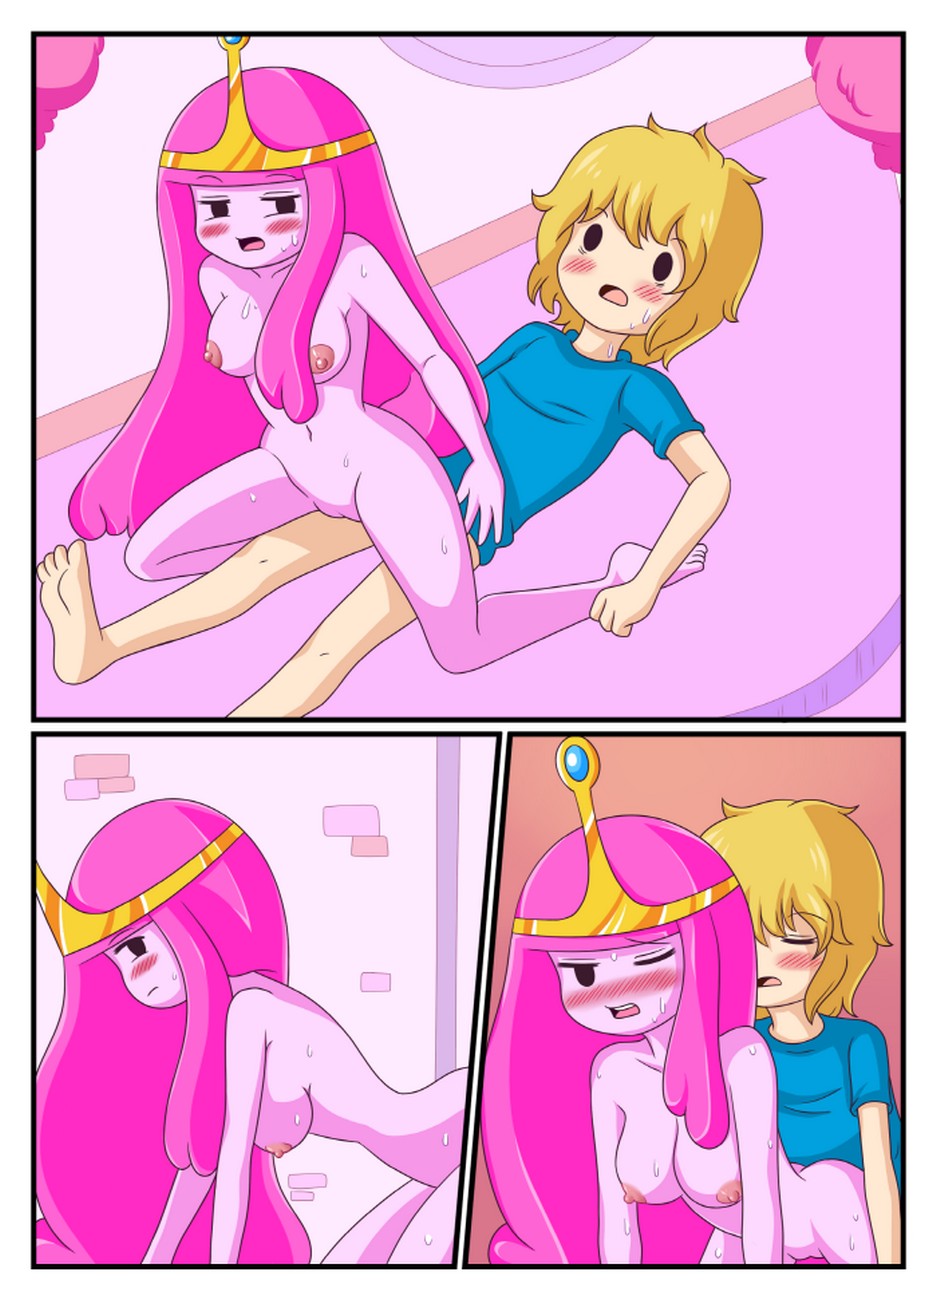 Sexy Adventure Time Porn - Adventure time sex pictures